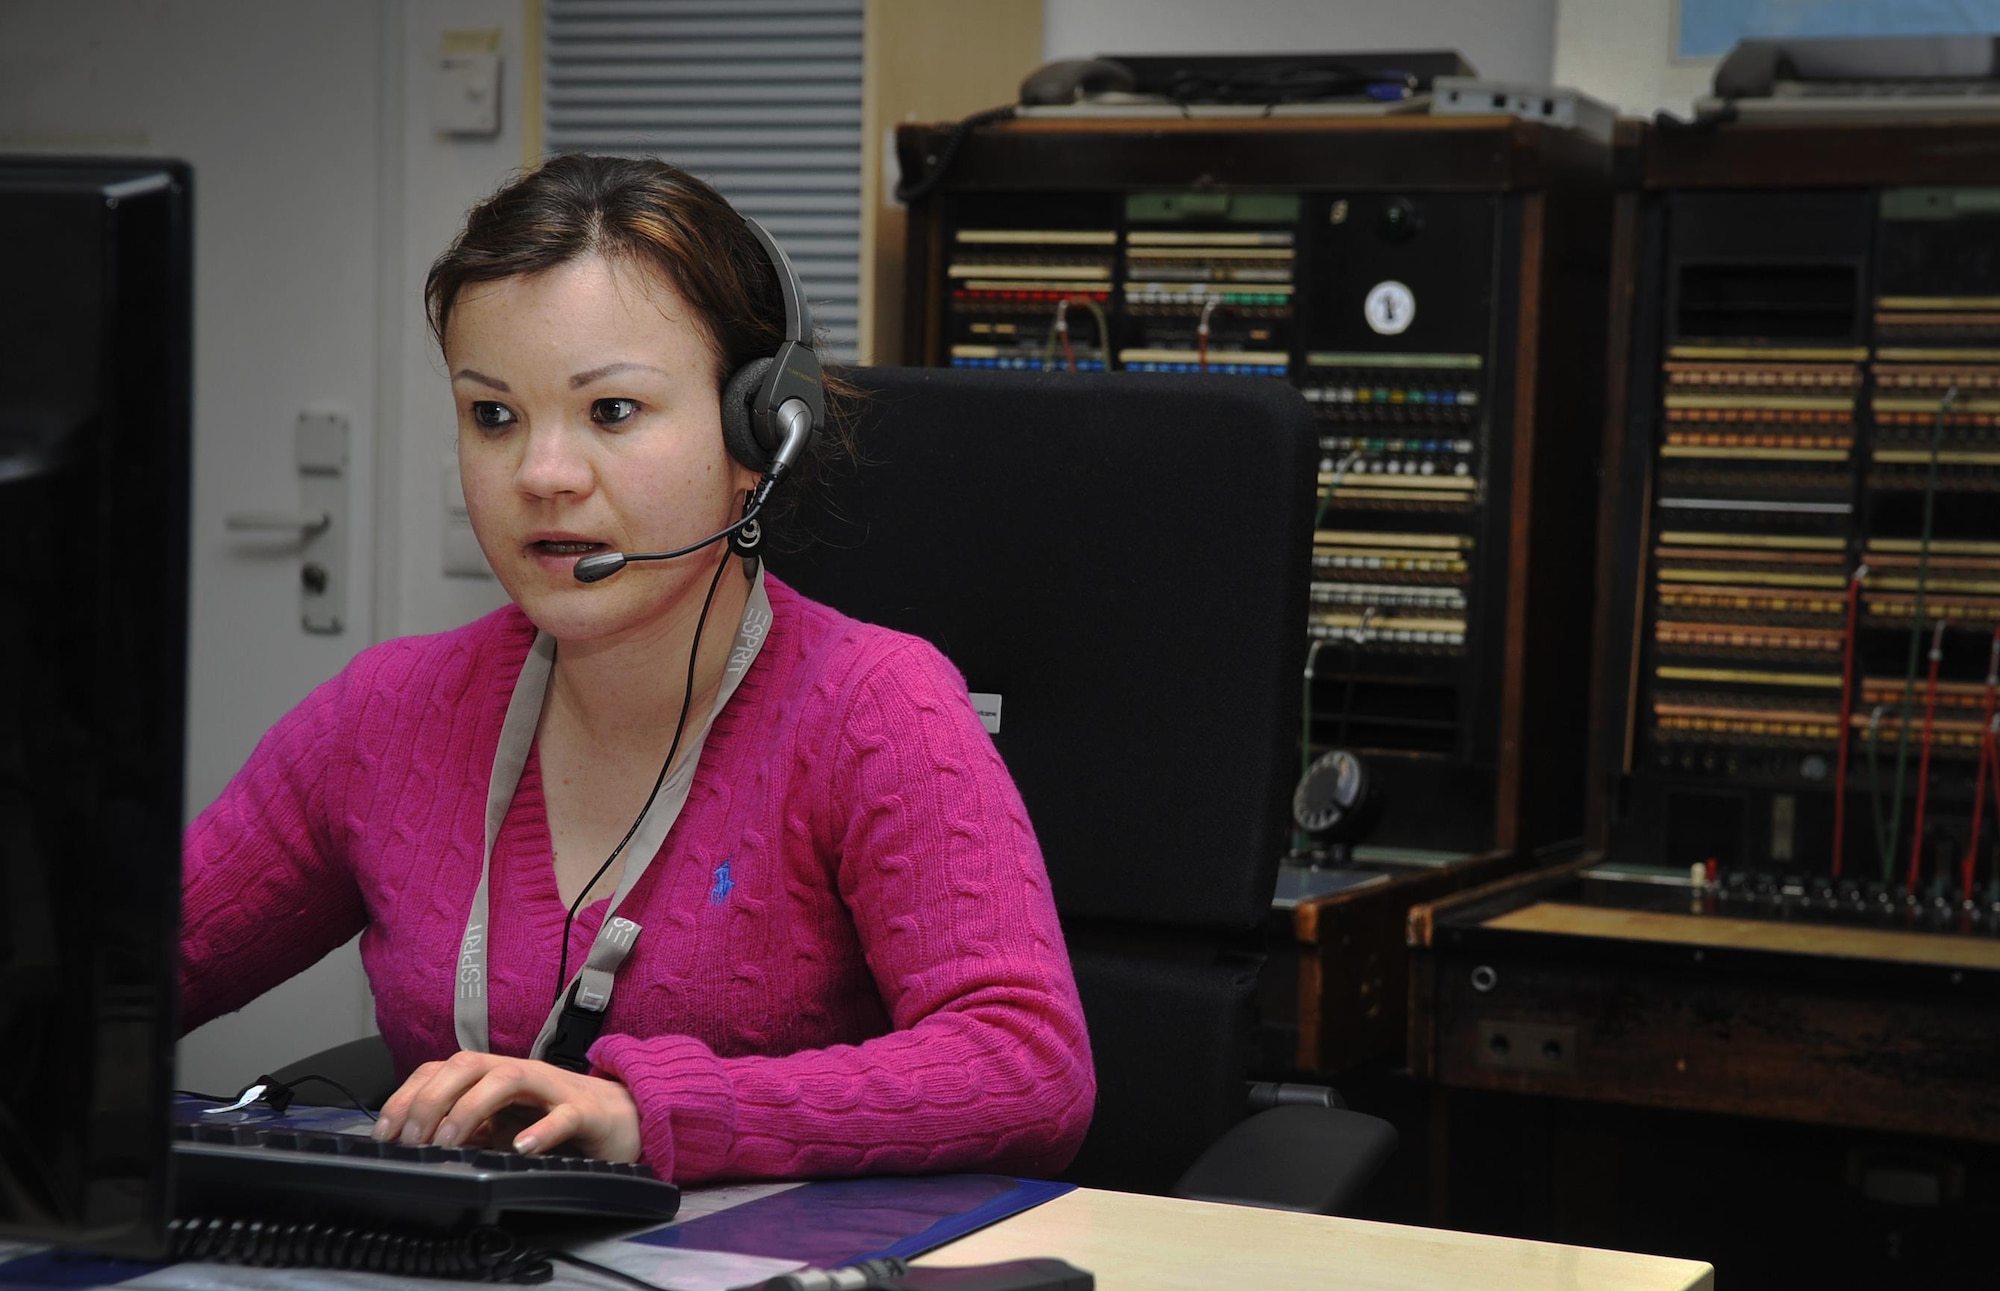 Verena Klein, a 86th Communications Squadron consolidated switchboard operator, transfers a caller to the appropriate organization Jan. 4, 2015, at Ramstein Air Base, Germany. The operators answer more than 1.5 million calls annually and service the Air Force, Army, Navy, Marines, and U.S. State Department personnel around the world. (U.S. Air Force photo/Airman 1st Class Larissa Greatwood)